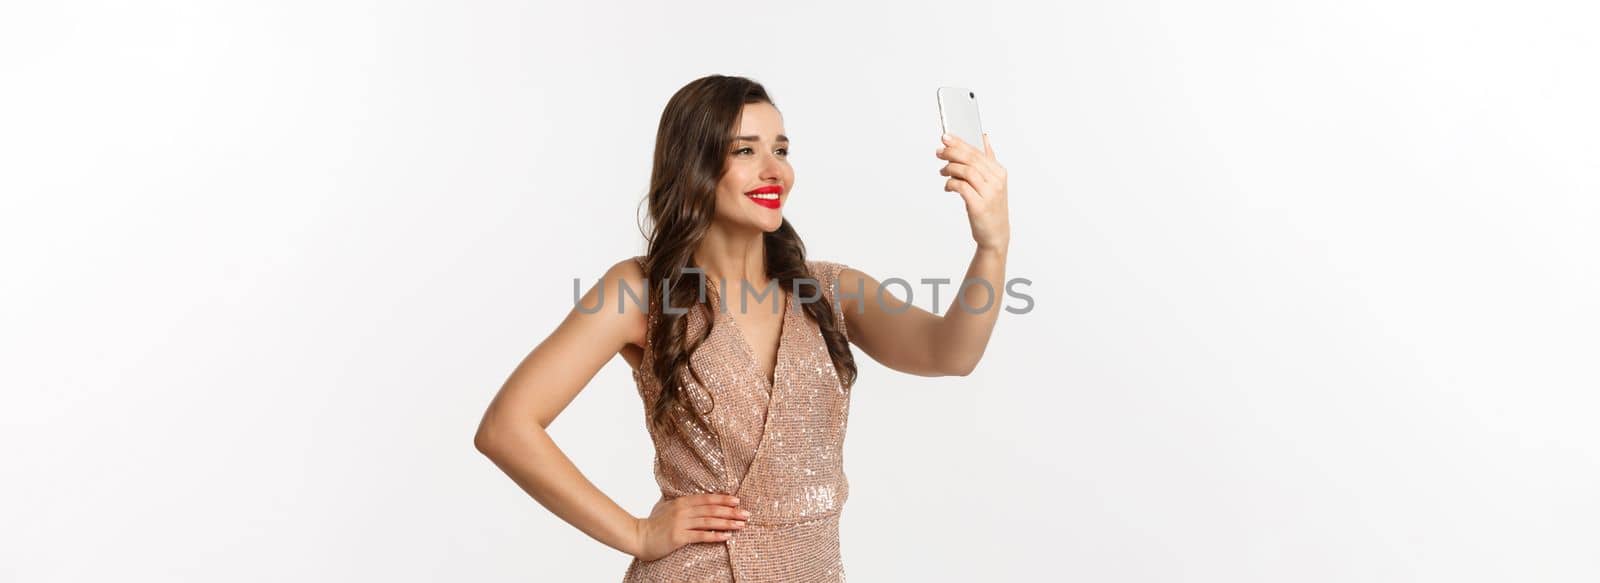 Beautiful woman with makeup and hairstyle, wearing glamour dress, taking selfie on smartphone, celebrating christmas party, white background.